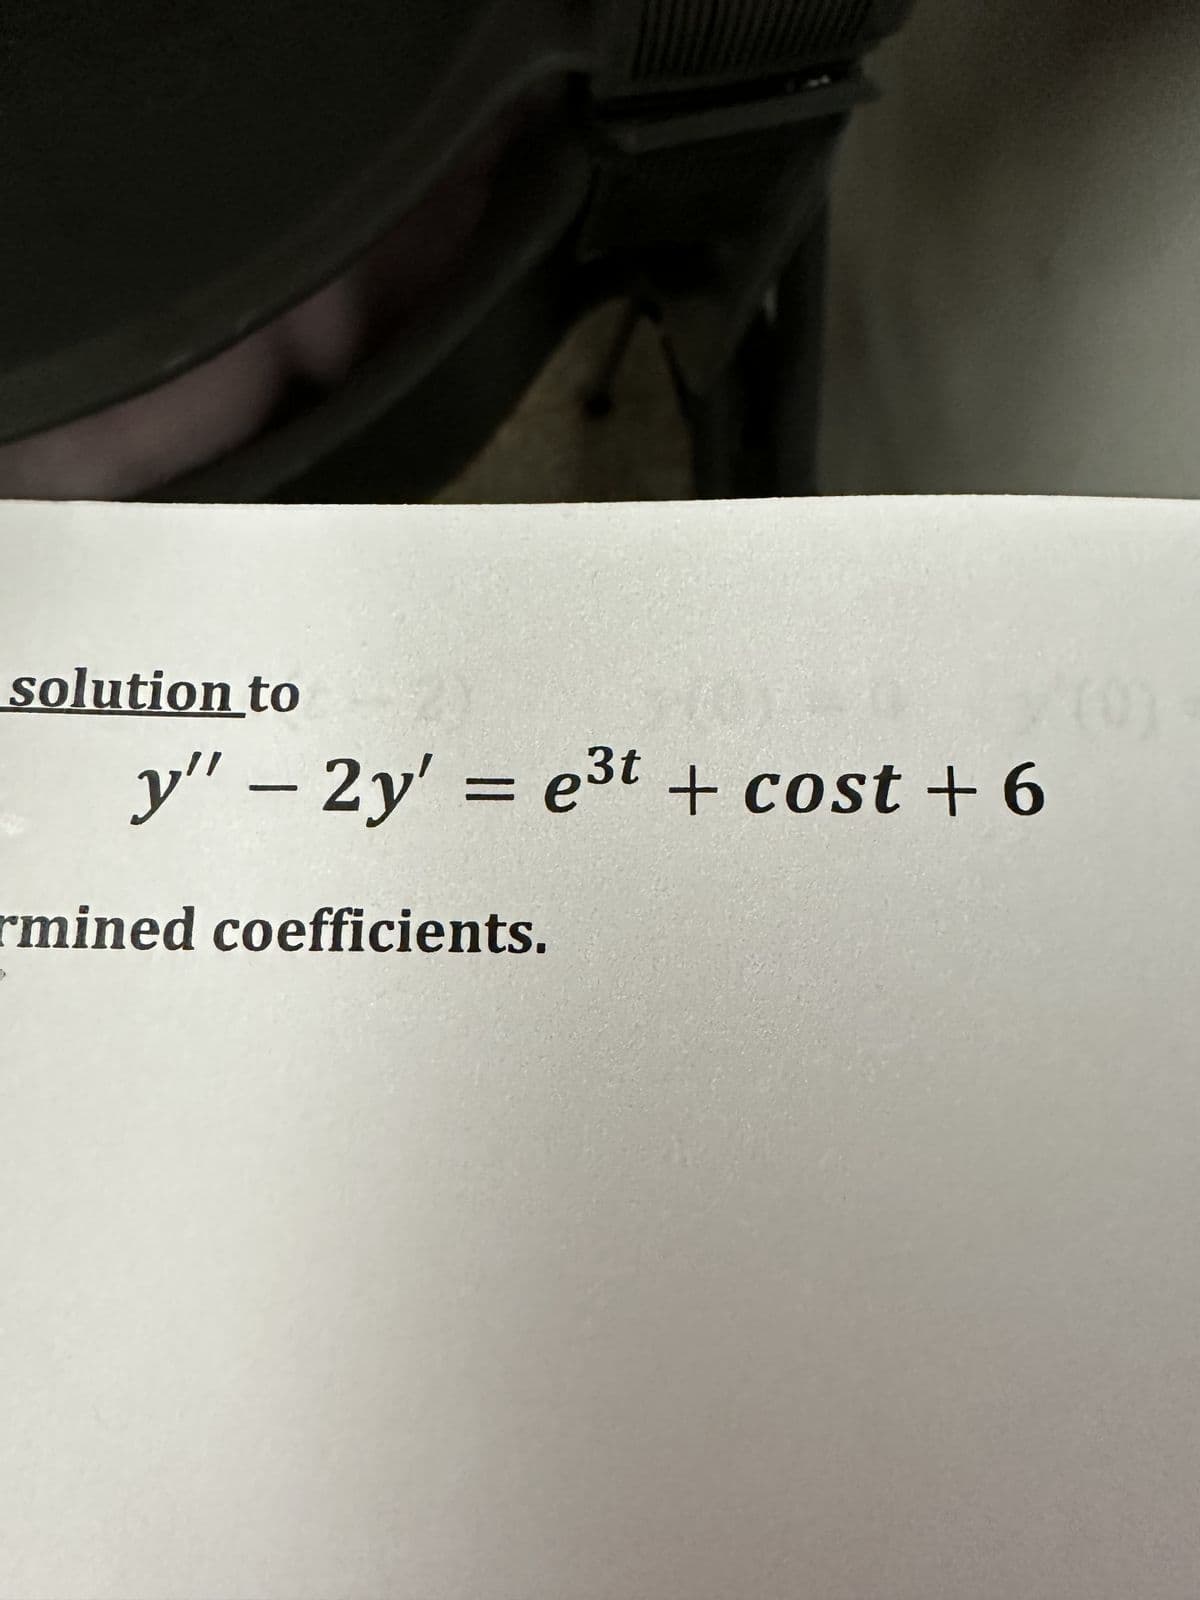 solution to
y" - 2y' = e³t+ cost + 6
rmined coefficients.